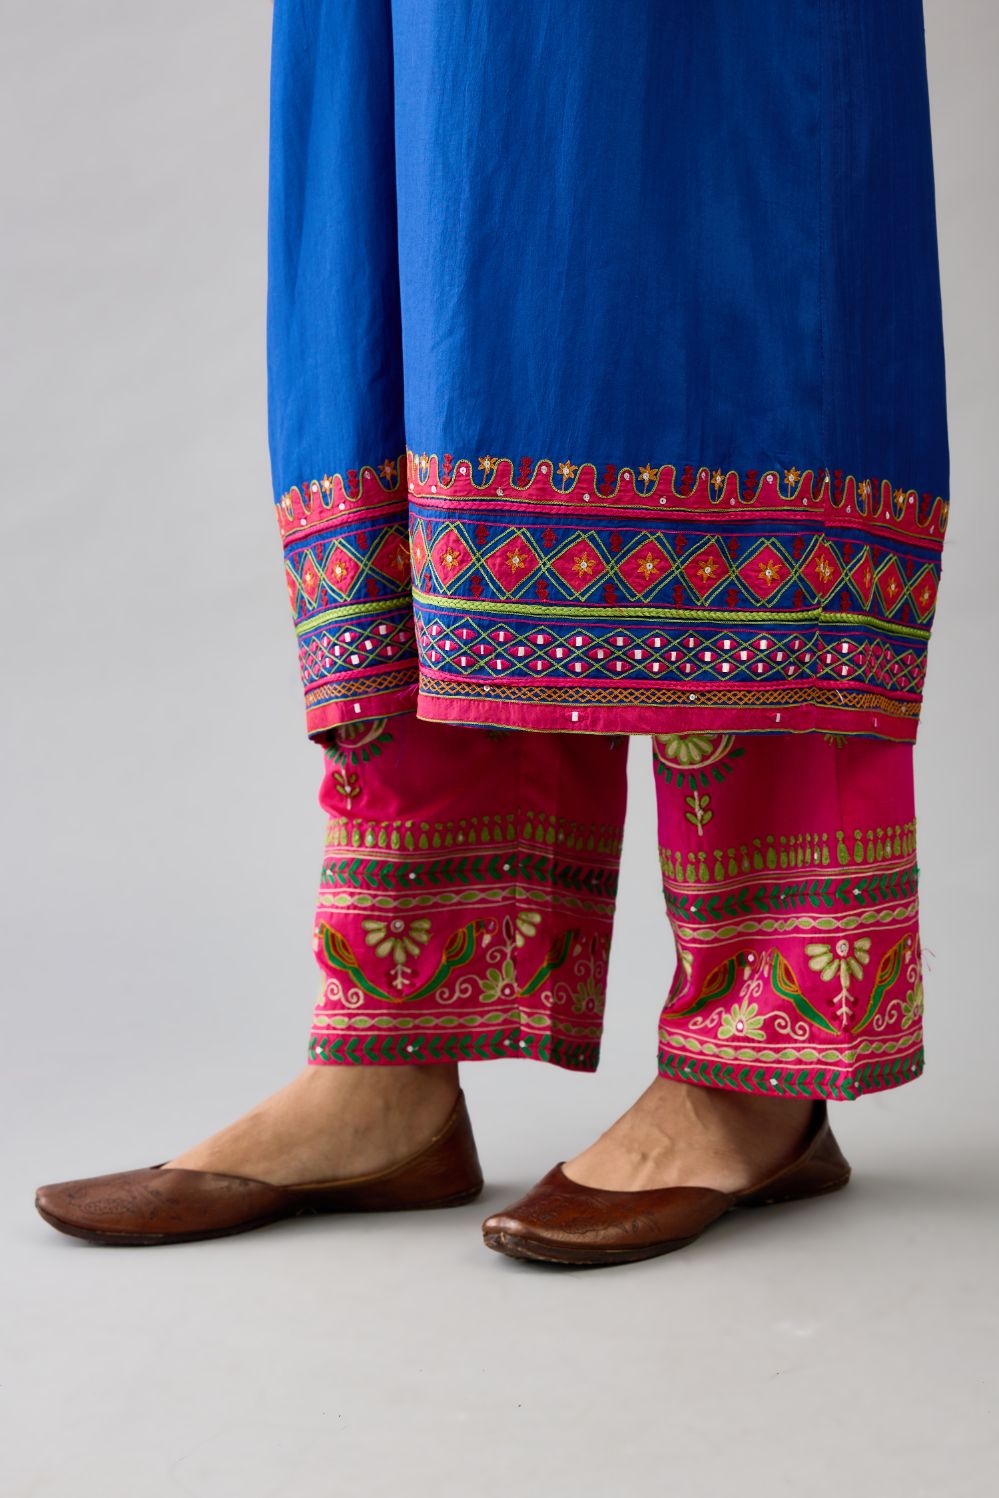 Blue silk embroidered kurta dress with V neck, yoke and fine gathers at empire line.